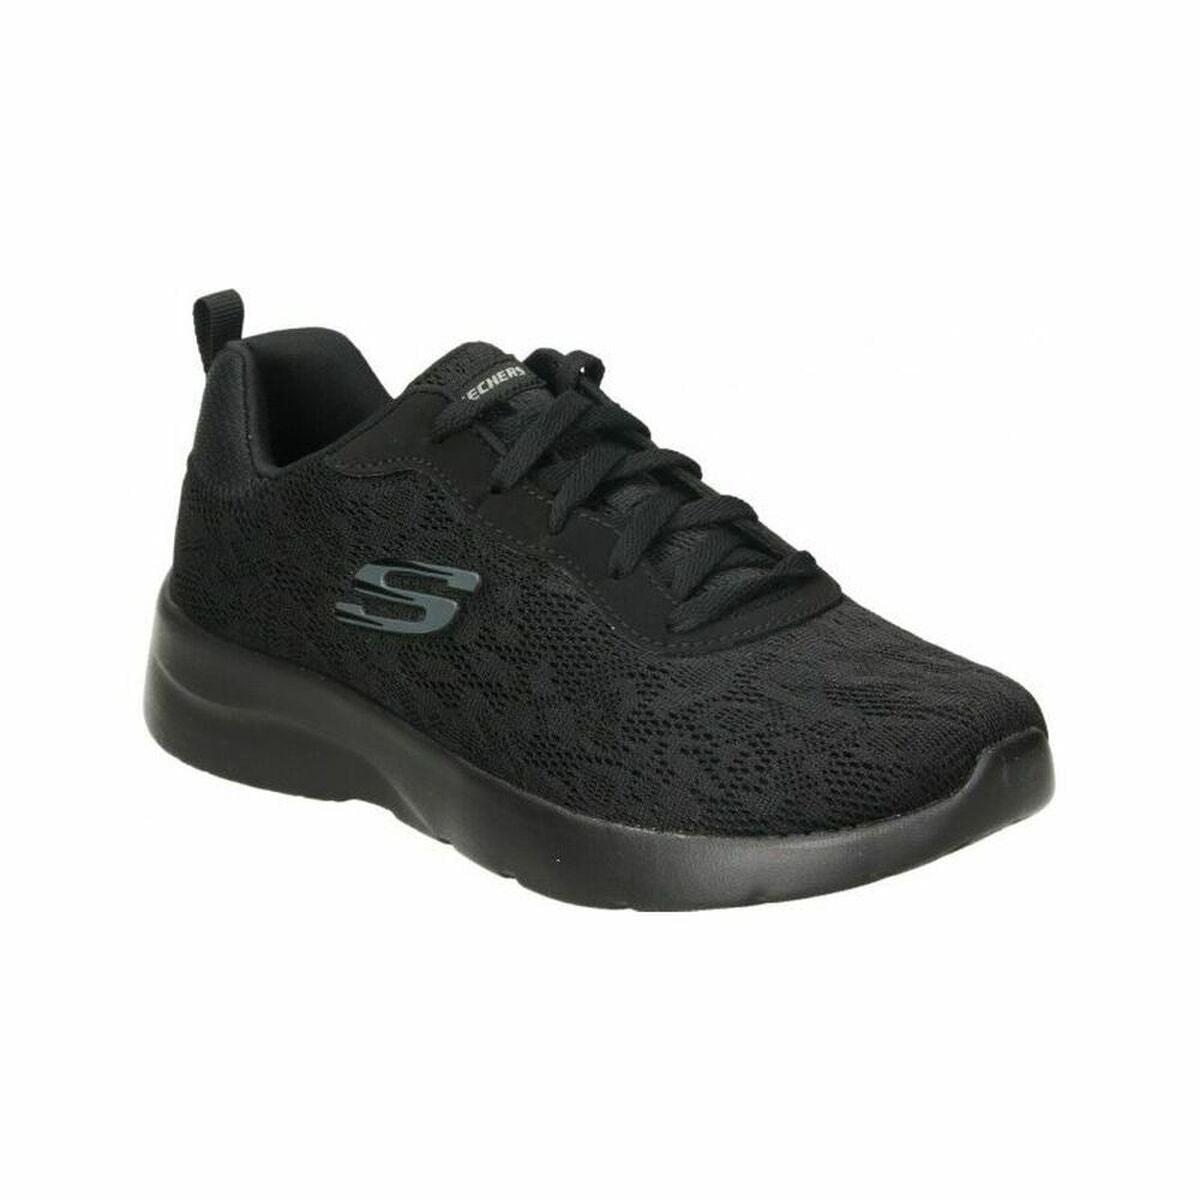 Sports Trainers for Women Skechers Floral Mesh Lace Up W Black